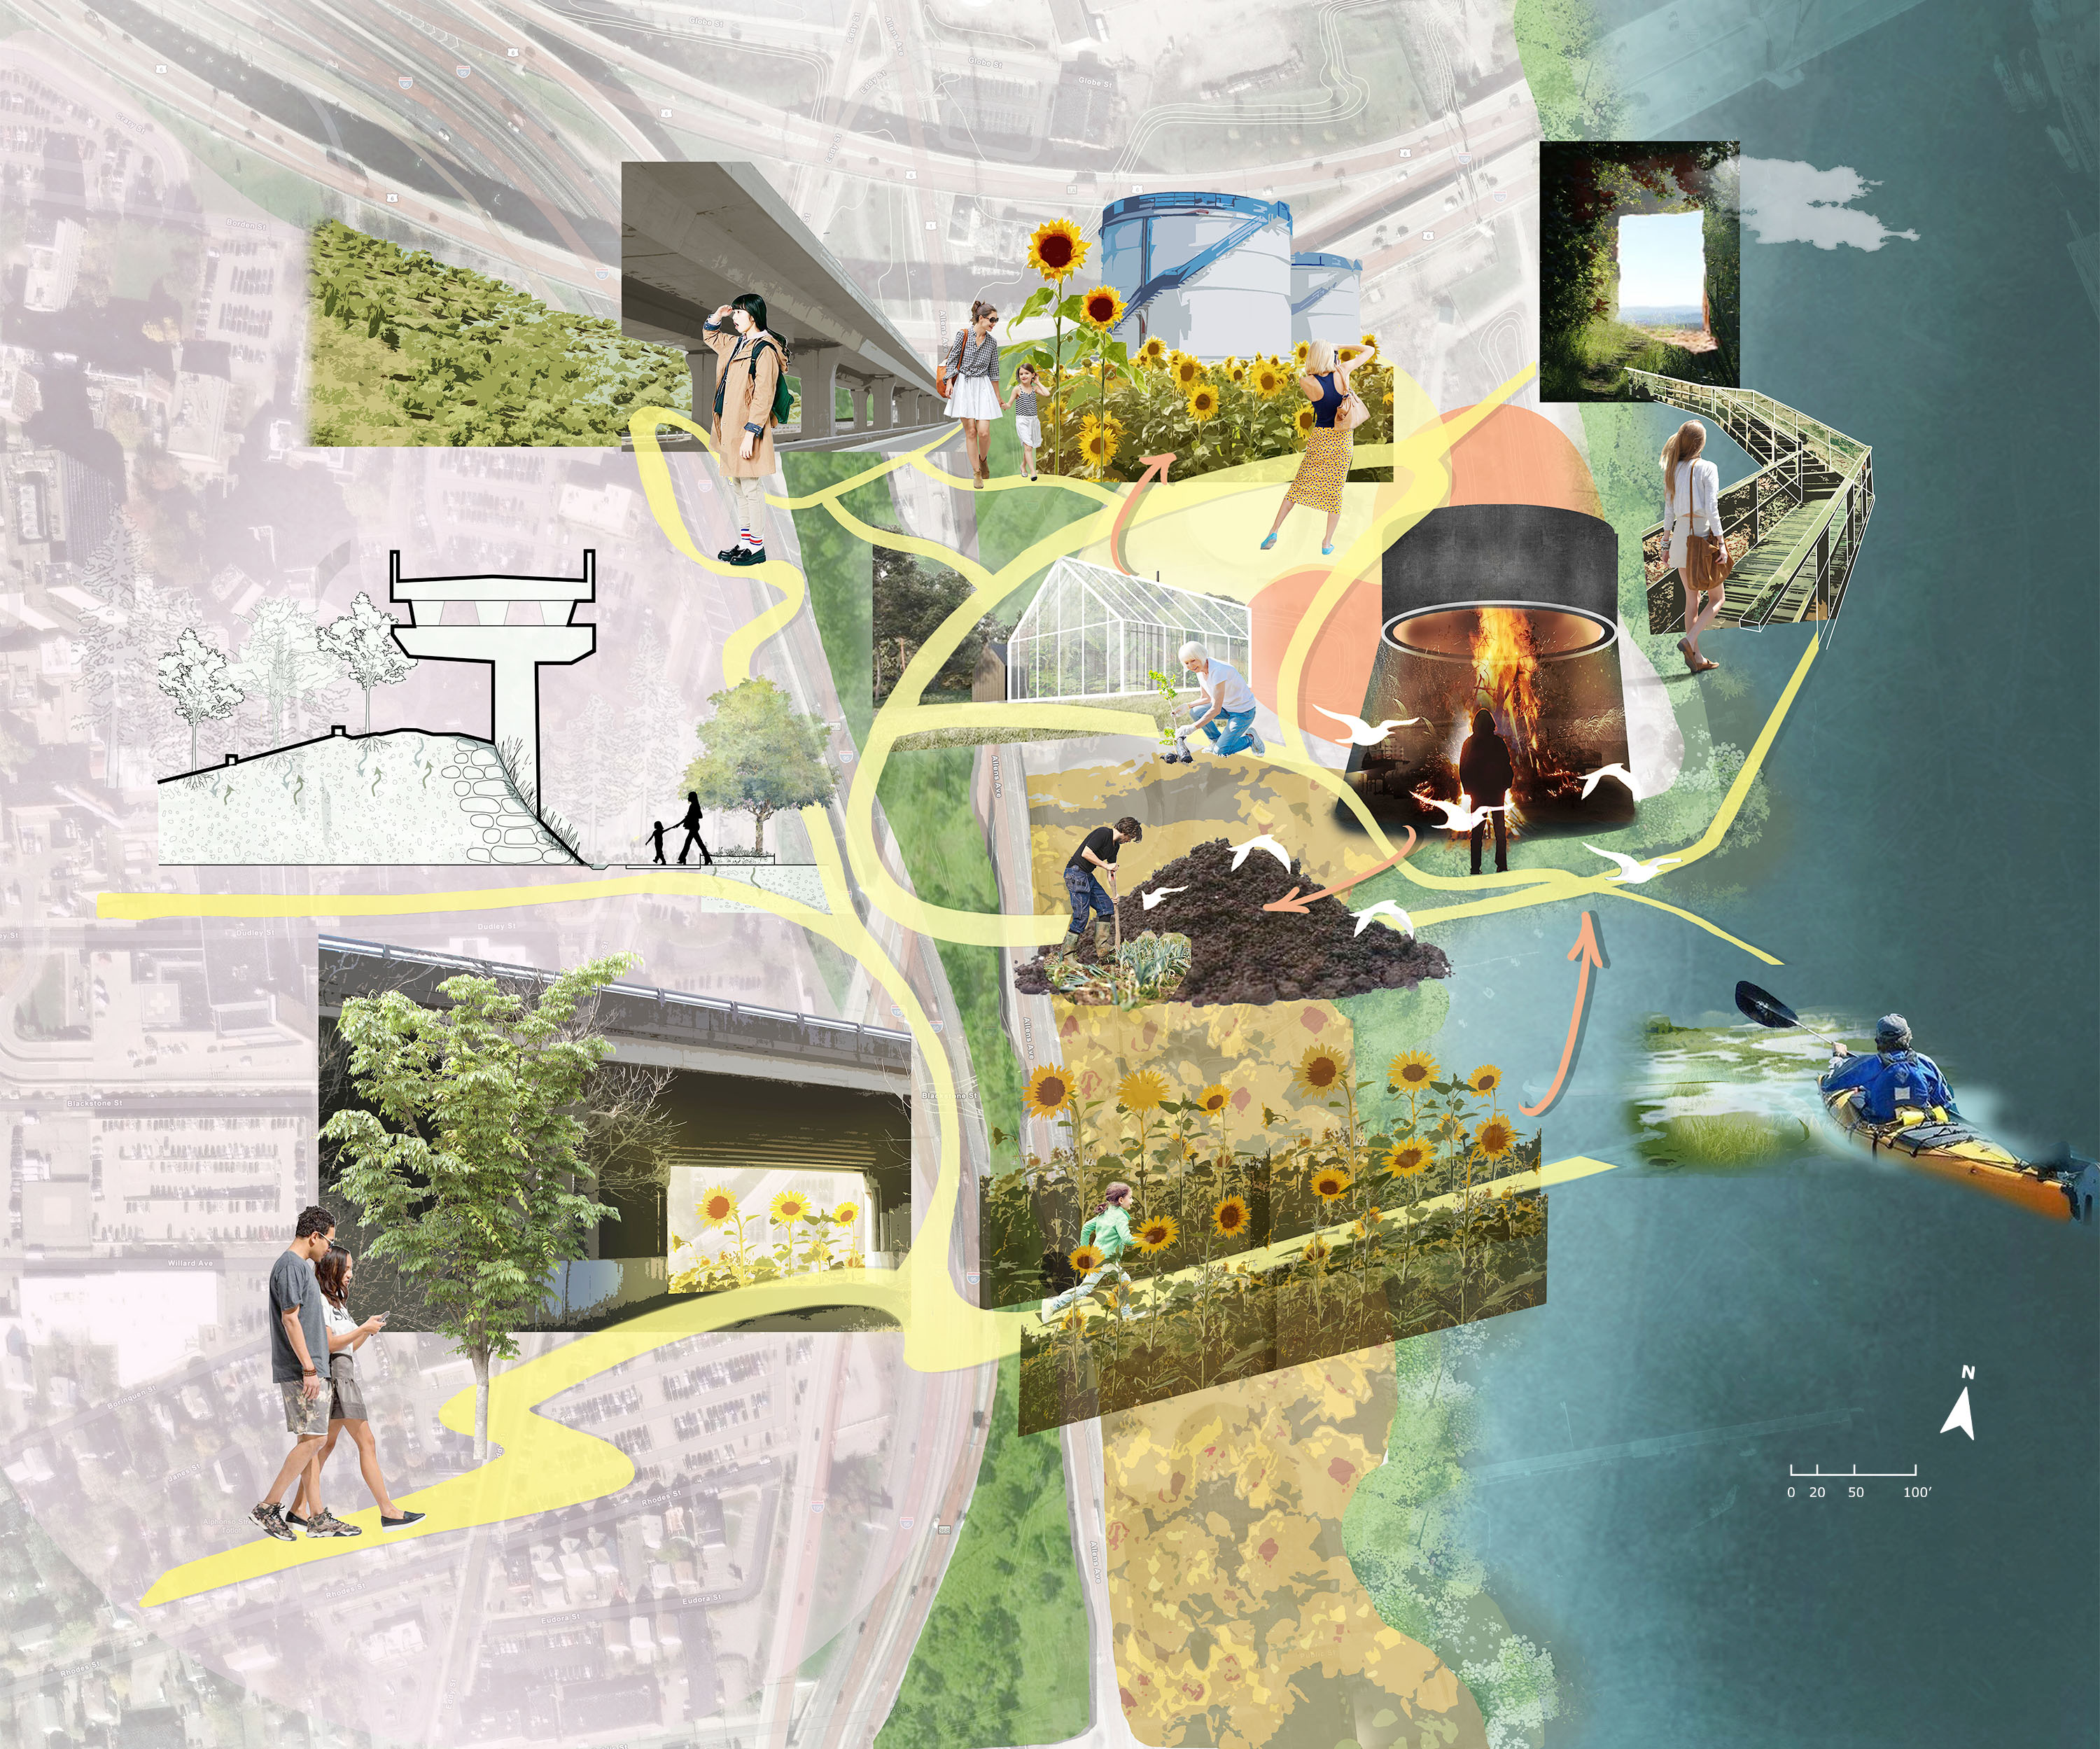 /This%20Site%20Program%20Plan%20designs%20landscapes%20that%20integrate%20human-plant%20interactions%2C%20highlighting%20plants%27%20role%20in%20pollution%20mitigation%20and%20promoting%20sustainable%20practices%20to%20foster%20environmental%20stewardship%20and%20empathy.